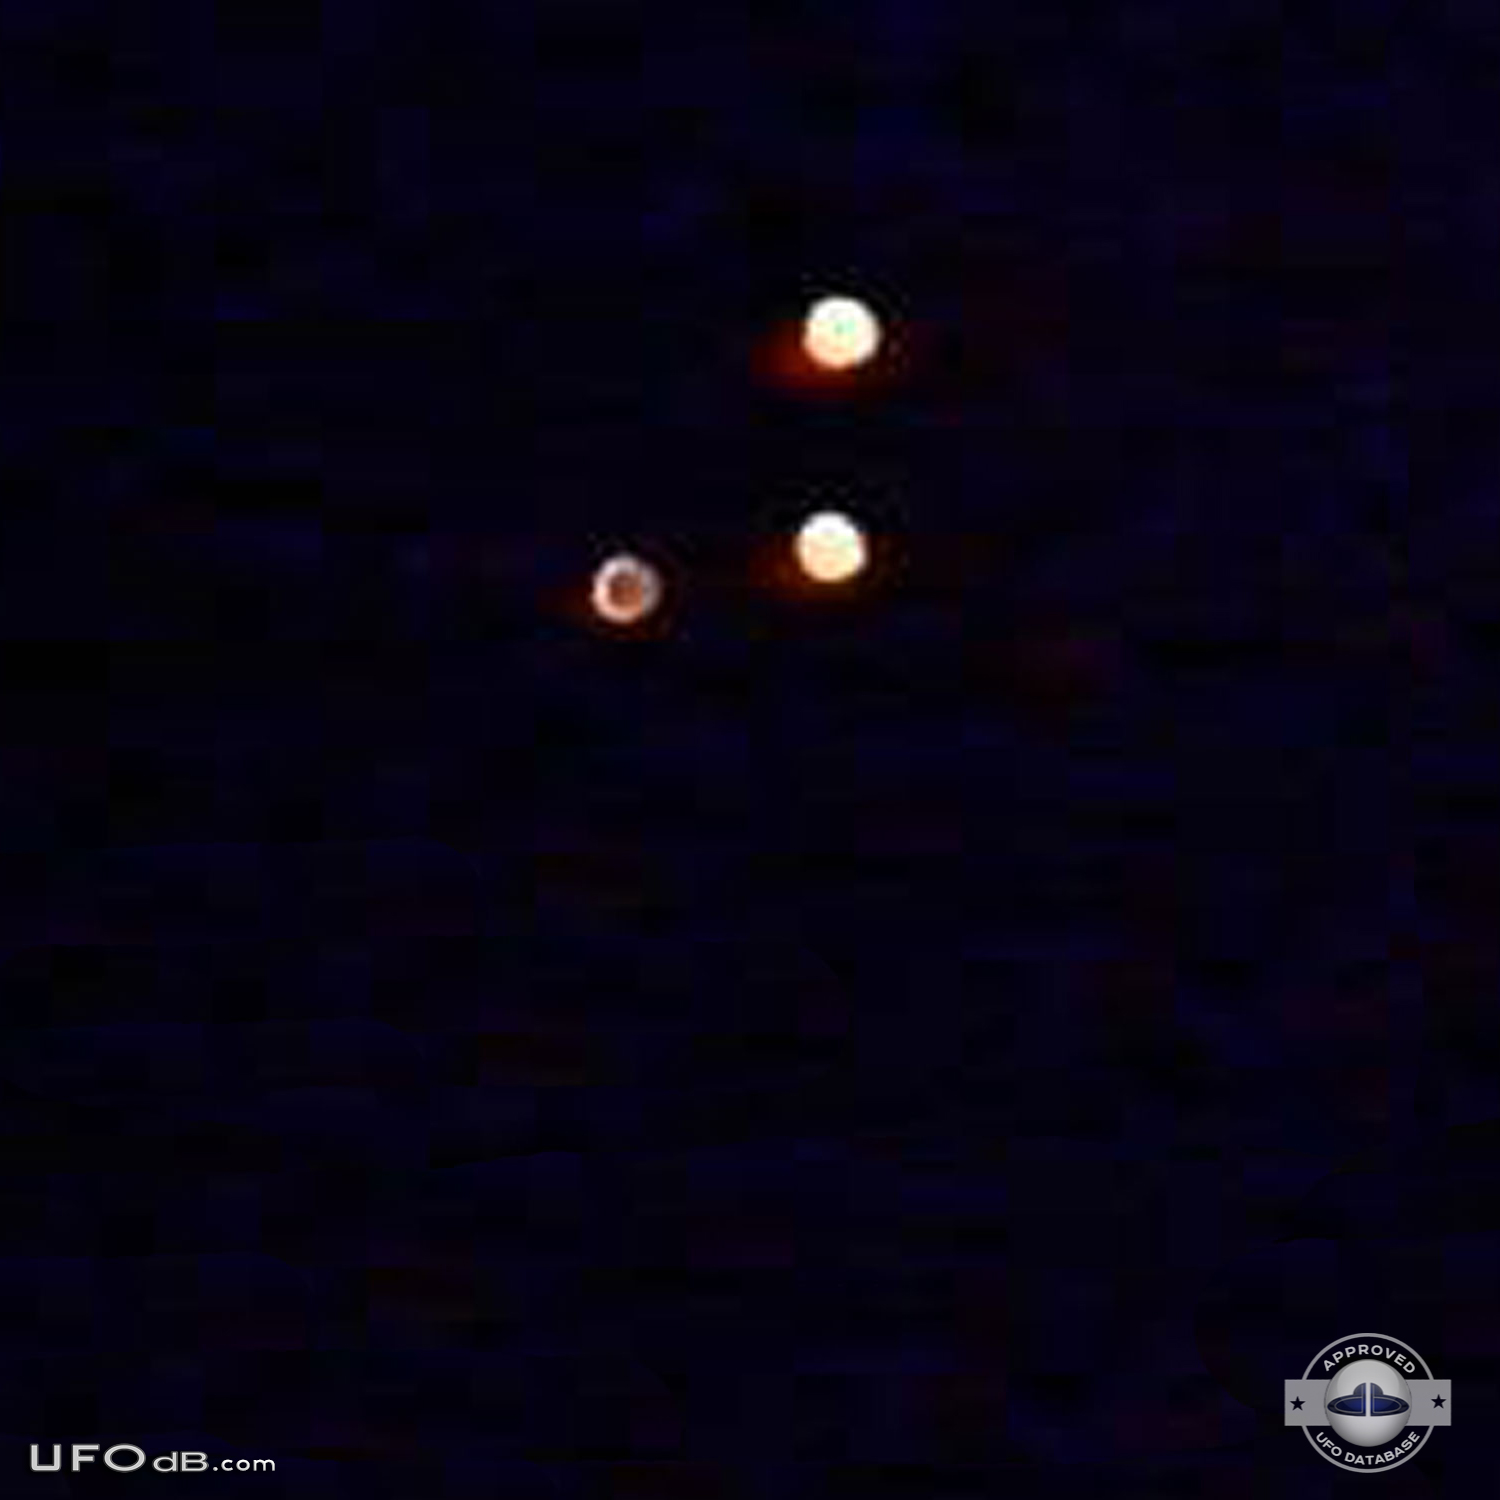 Strange trio of spherical UFOs caught on photo over Israel - 1992 UFO Picture #402-1